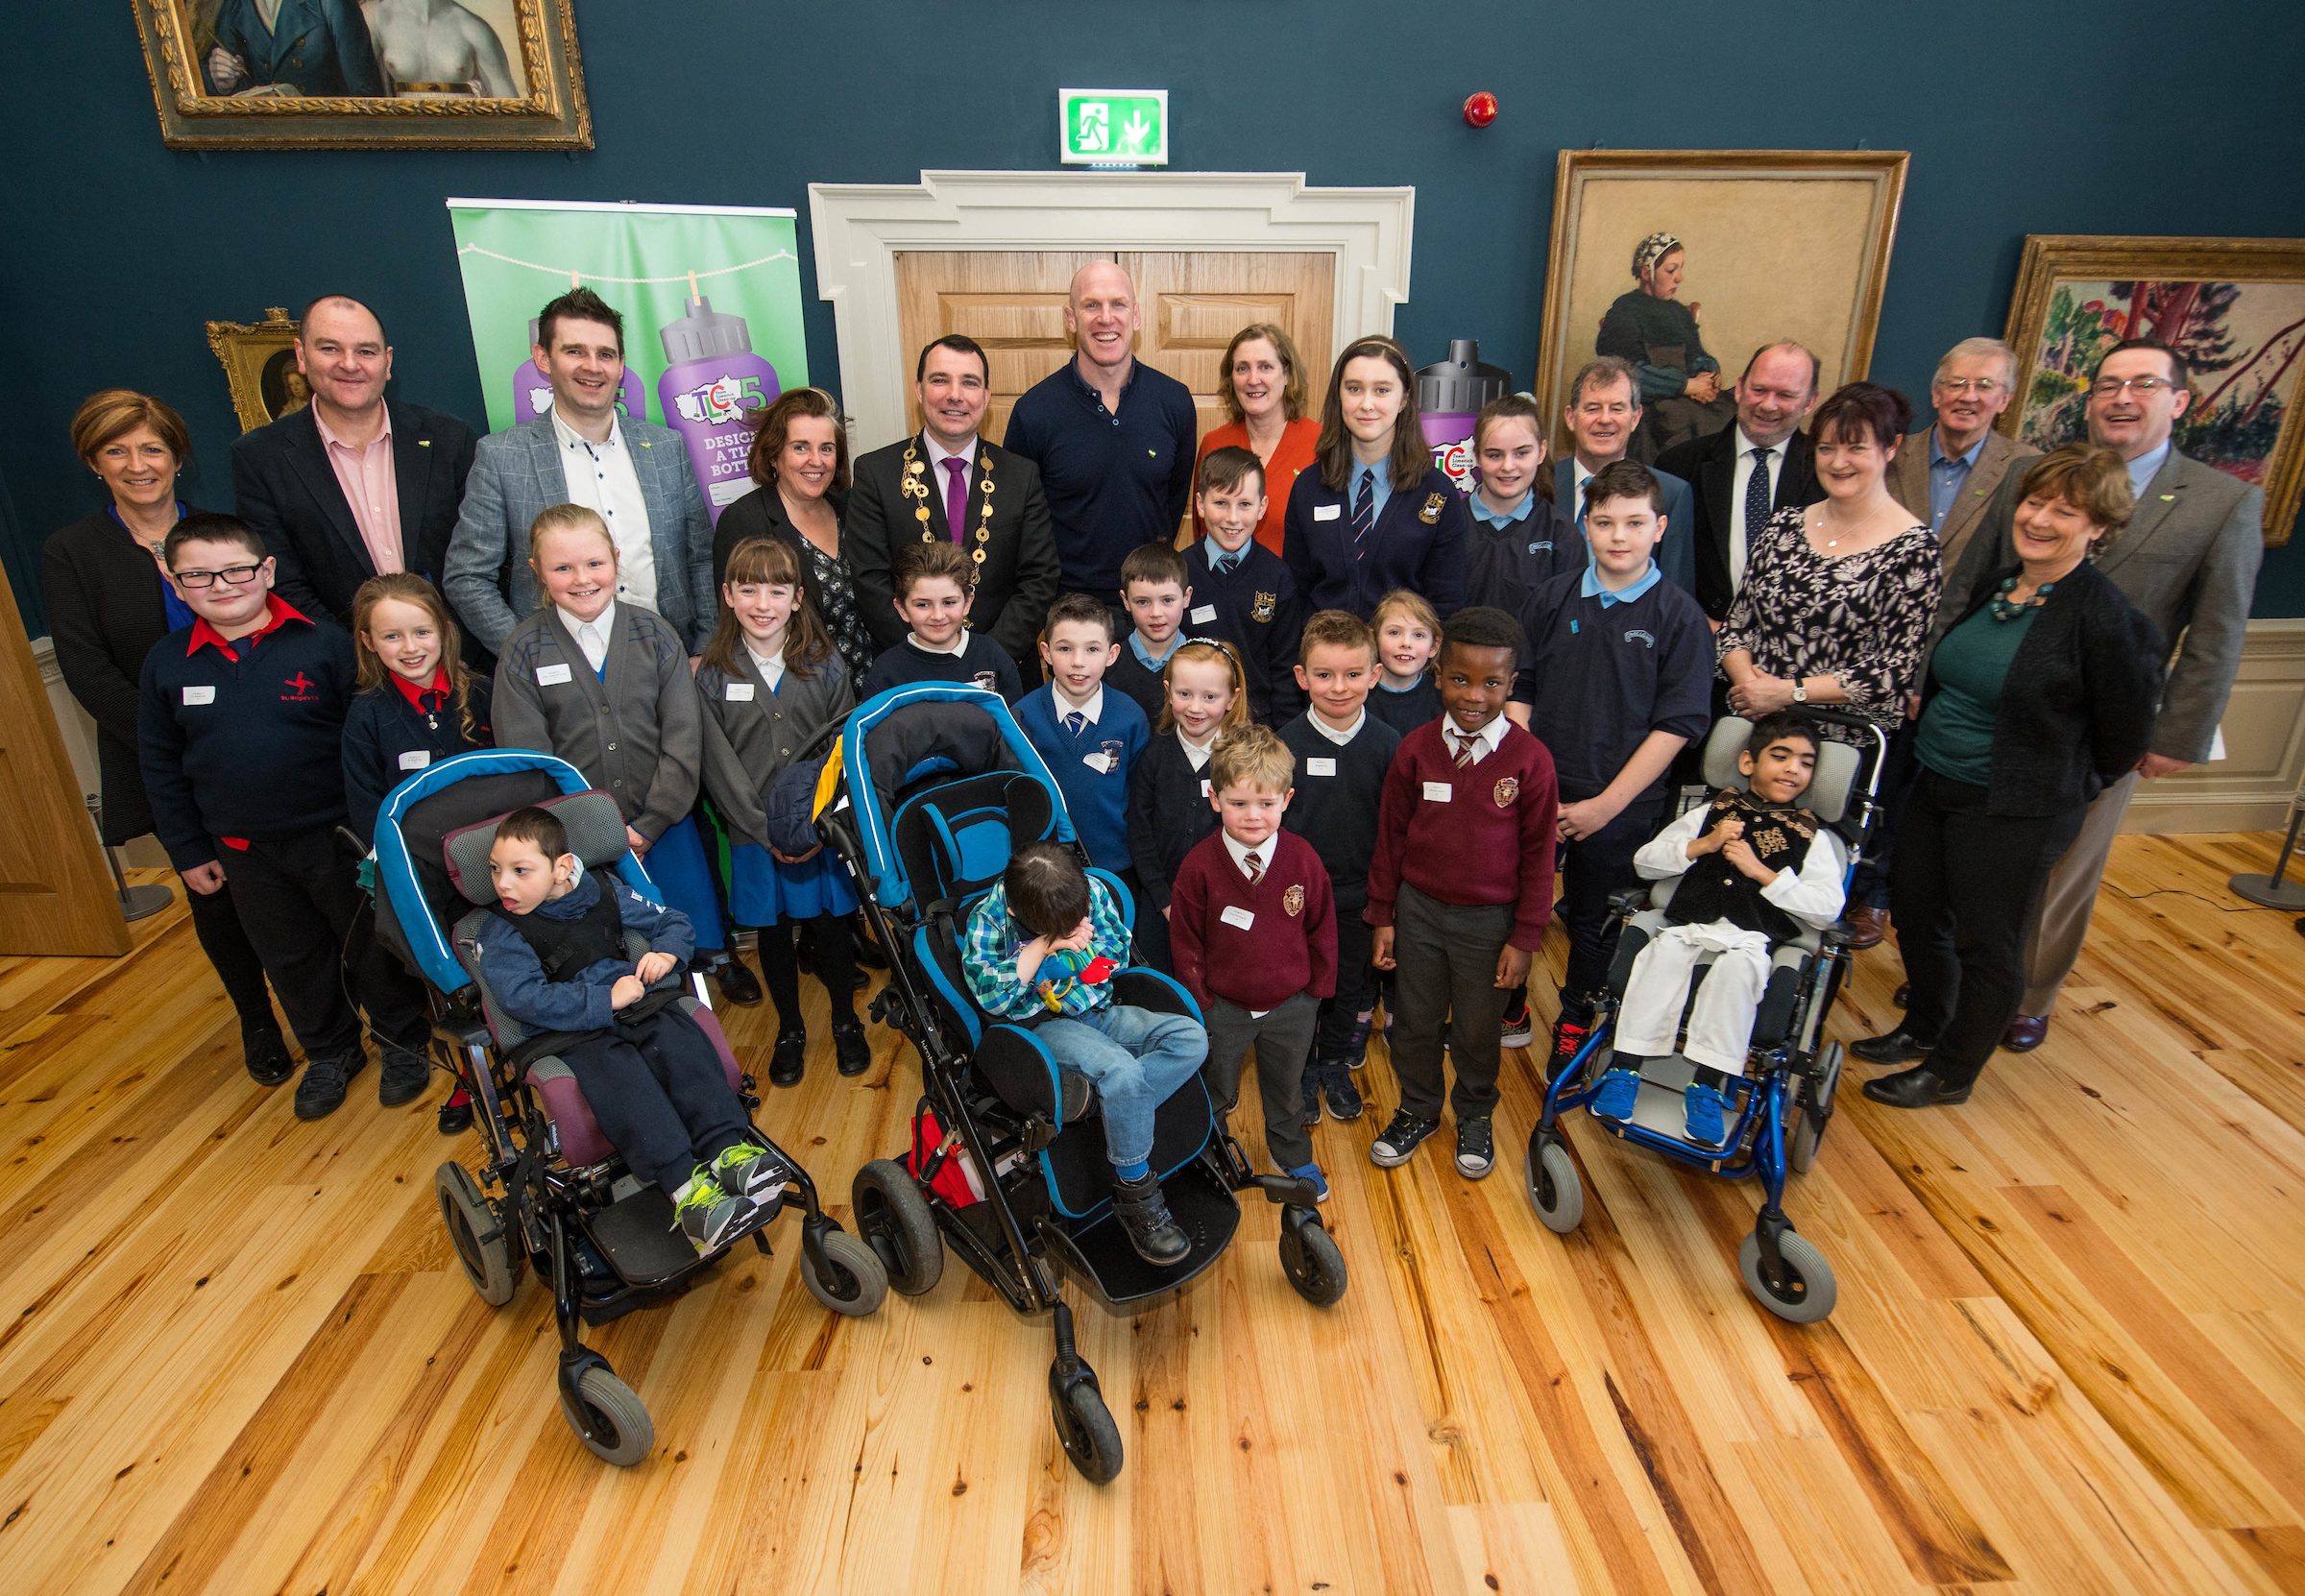 07/03/2019Prizewinners and representatives along with Joe Cleary from Mr Binman, Sinead McDonnell from Limerick City and County Council, Mayor of Limerick City and County, Cllr James Collins, Paul O'Connell, Helen O'Riordan and JP McManus at the 'Design a TLC Bottle' prizegiving at the Hunt Museum, Limerick. Over 50 primary schools across the county entered ahead of Team Limerick Clean-Up 5, which will see thousands of volunteers take to the streets of Limerick city and county for Europe's largest one-day clean up. Sponsored by the JP McManus Benevolent Fund, the event has seen over 360 tonnes of litter gathered from the streets since inception in 2015. Over 14,000 volunteers have already signed up for the 2019 event, taking place on Good Friday, 19th April. Photo by Diarmuid Greene